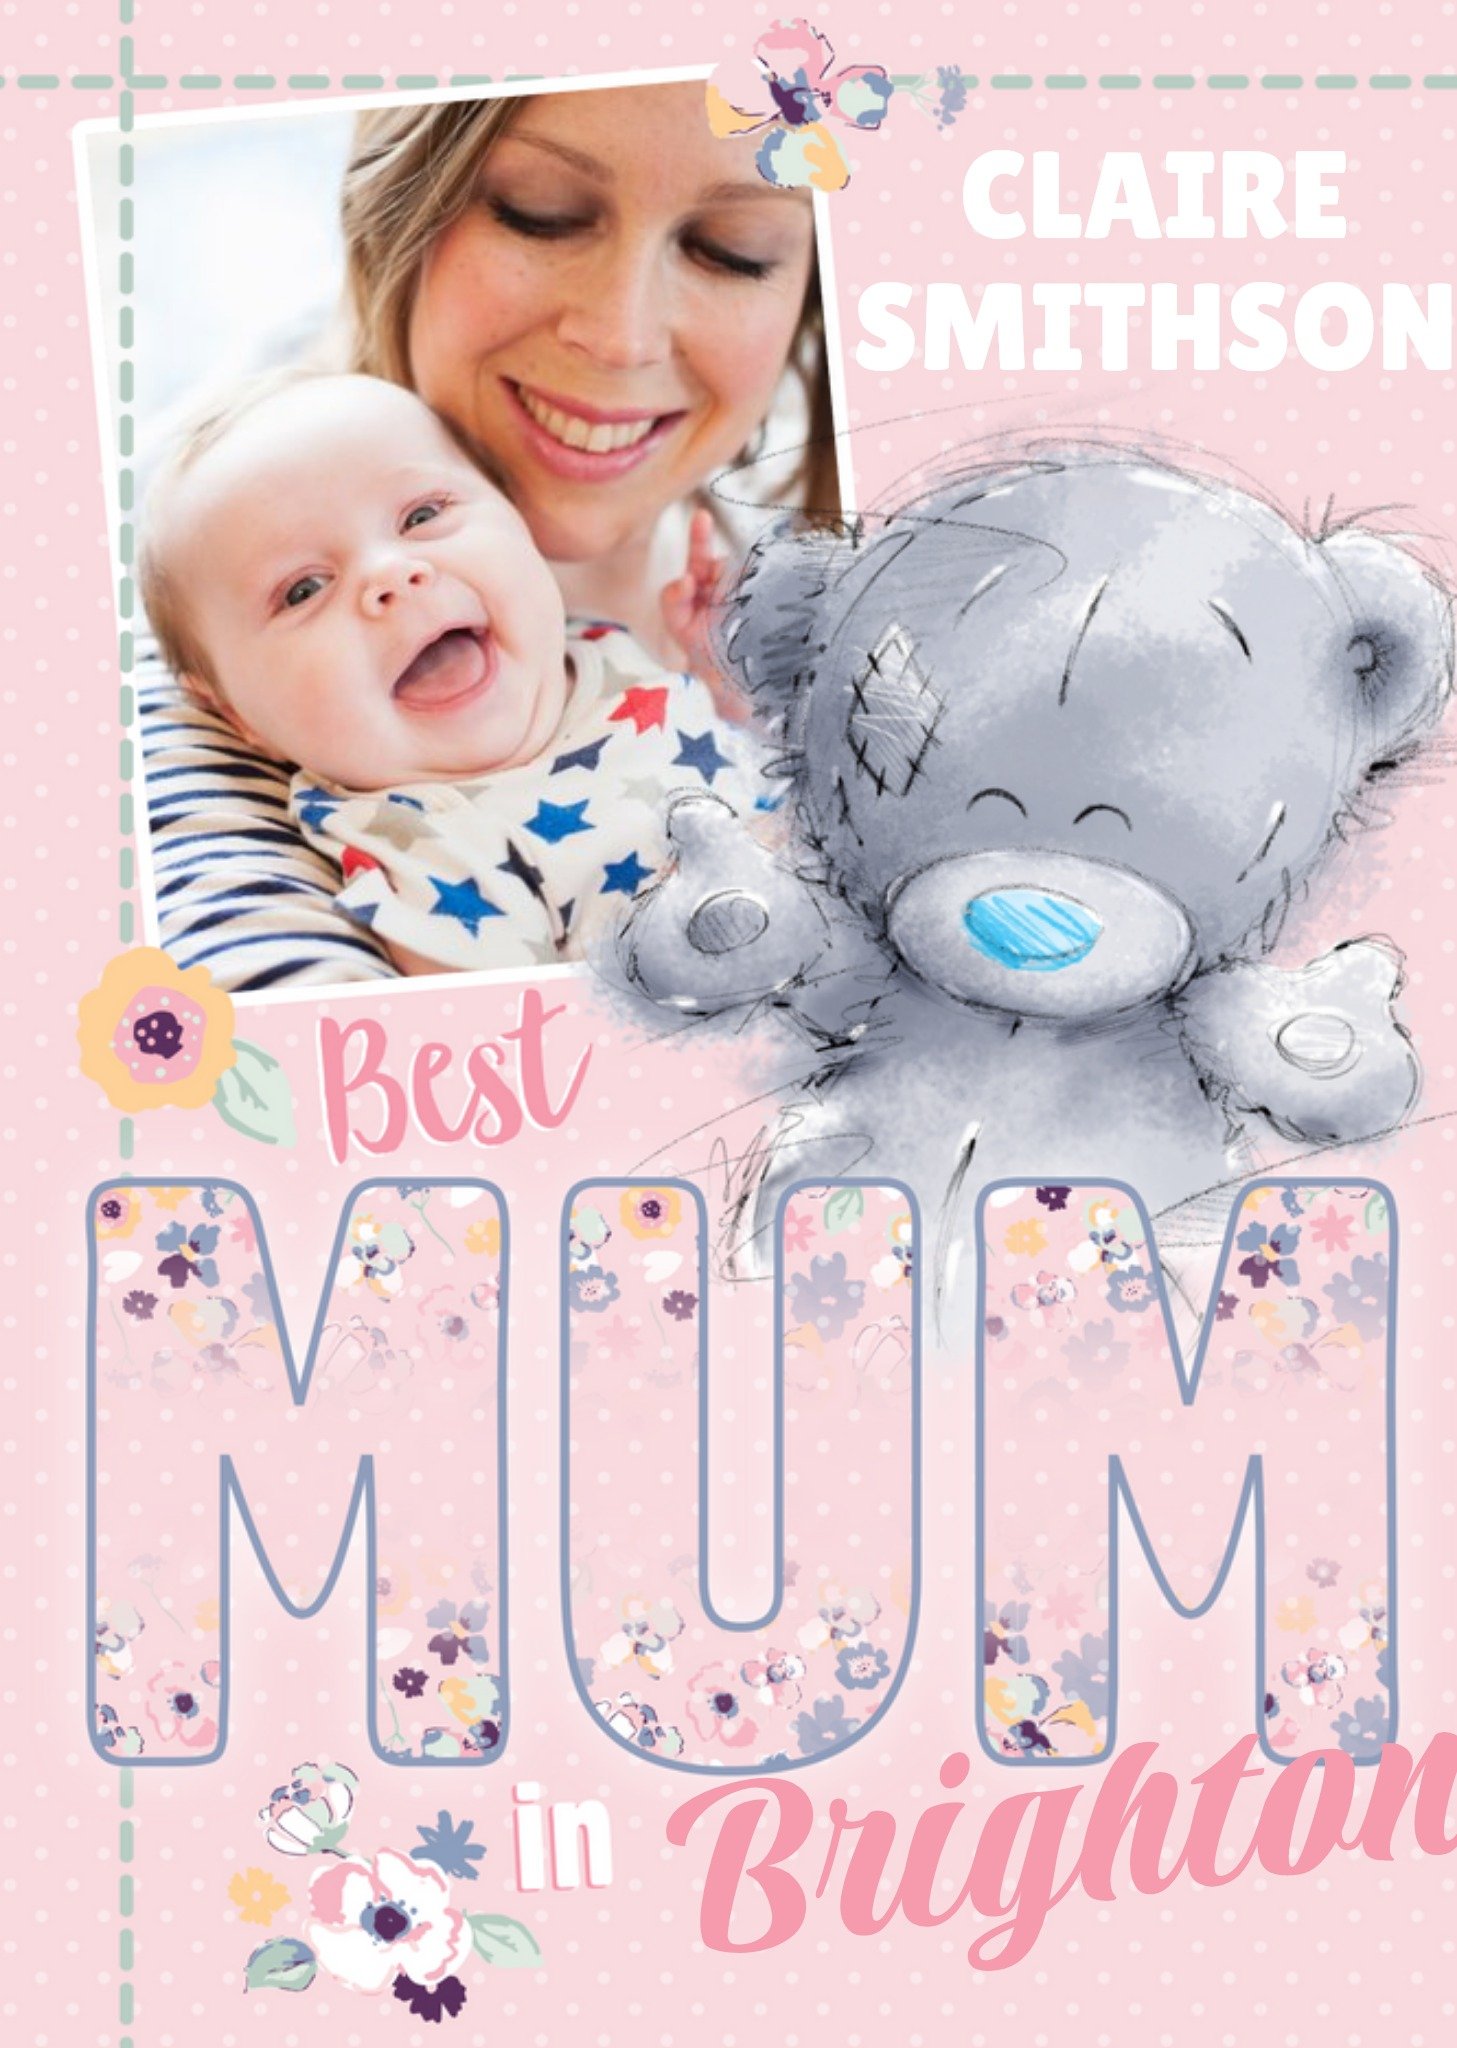 Me To You Mother's Day Card Tatty Teddy Photo Upload Best Mum In Place, Large